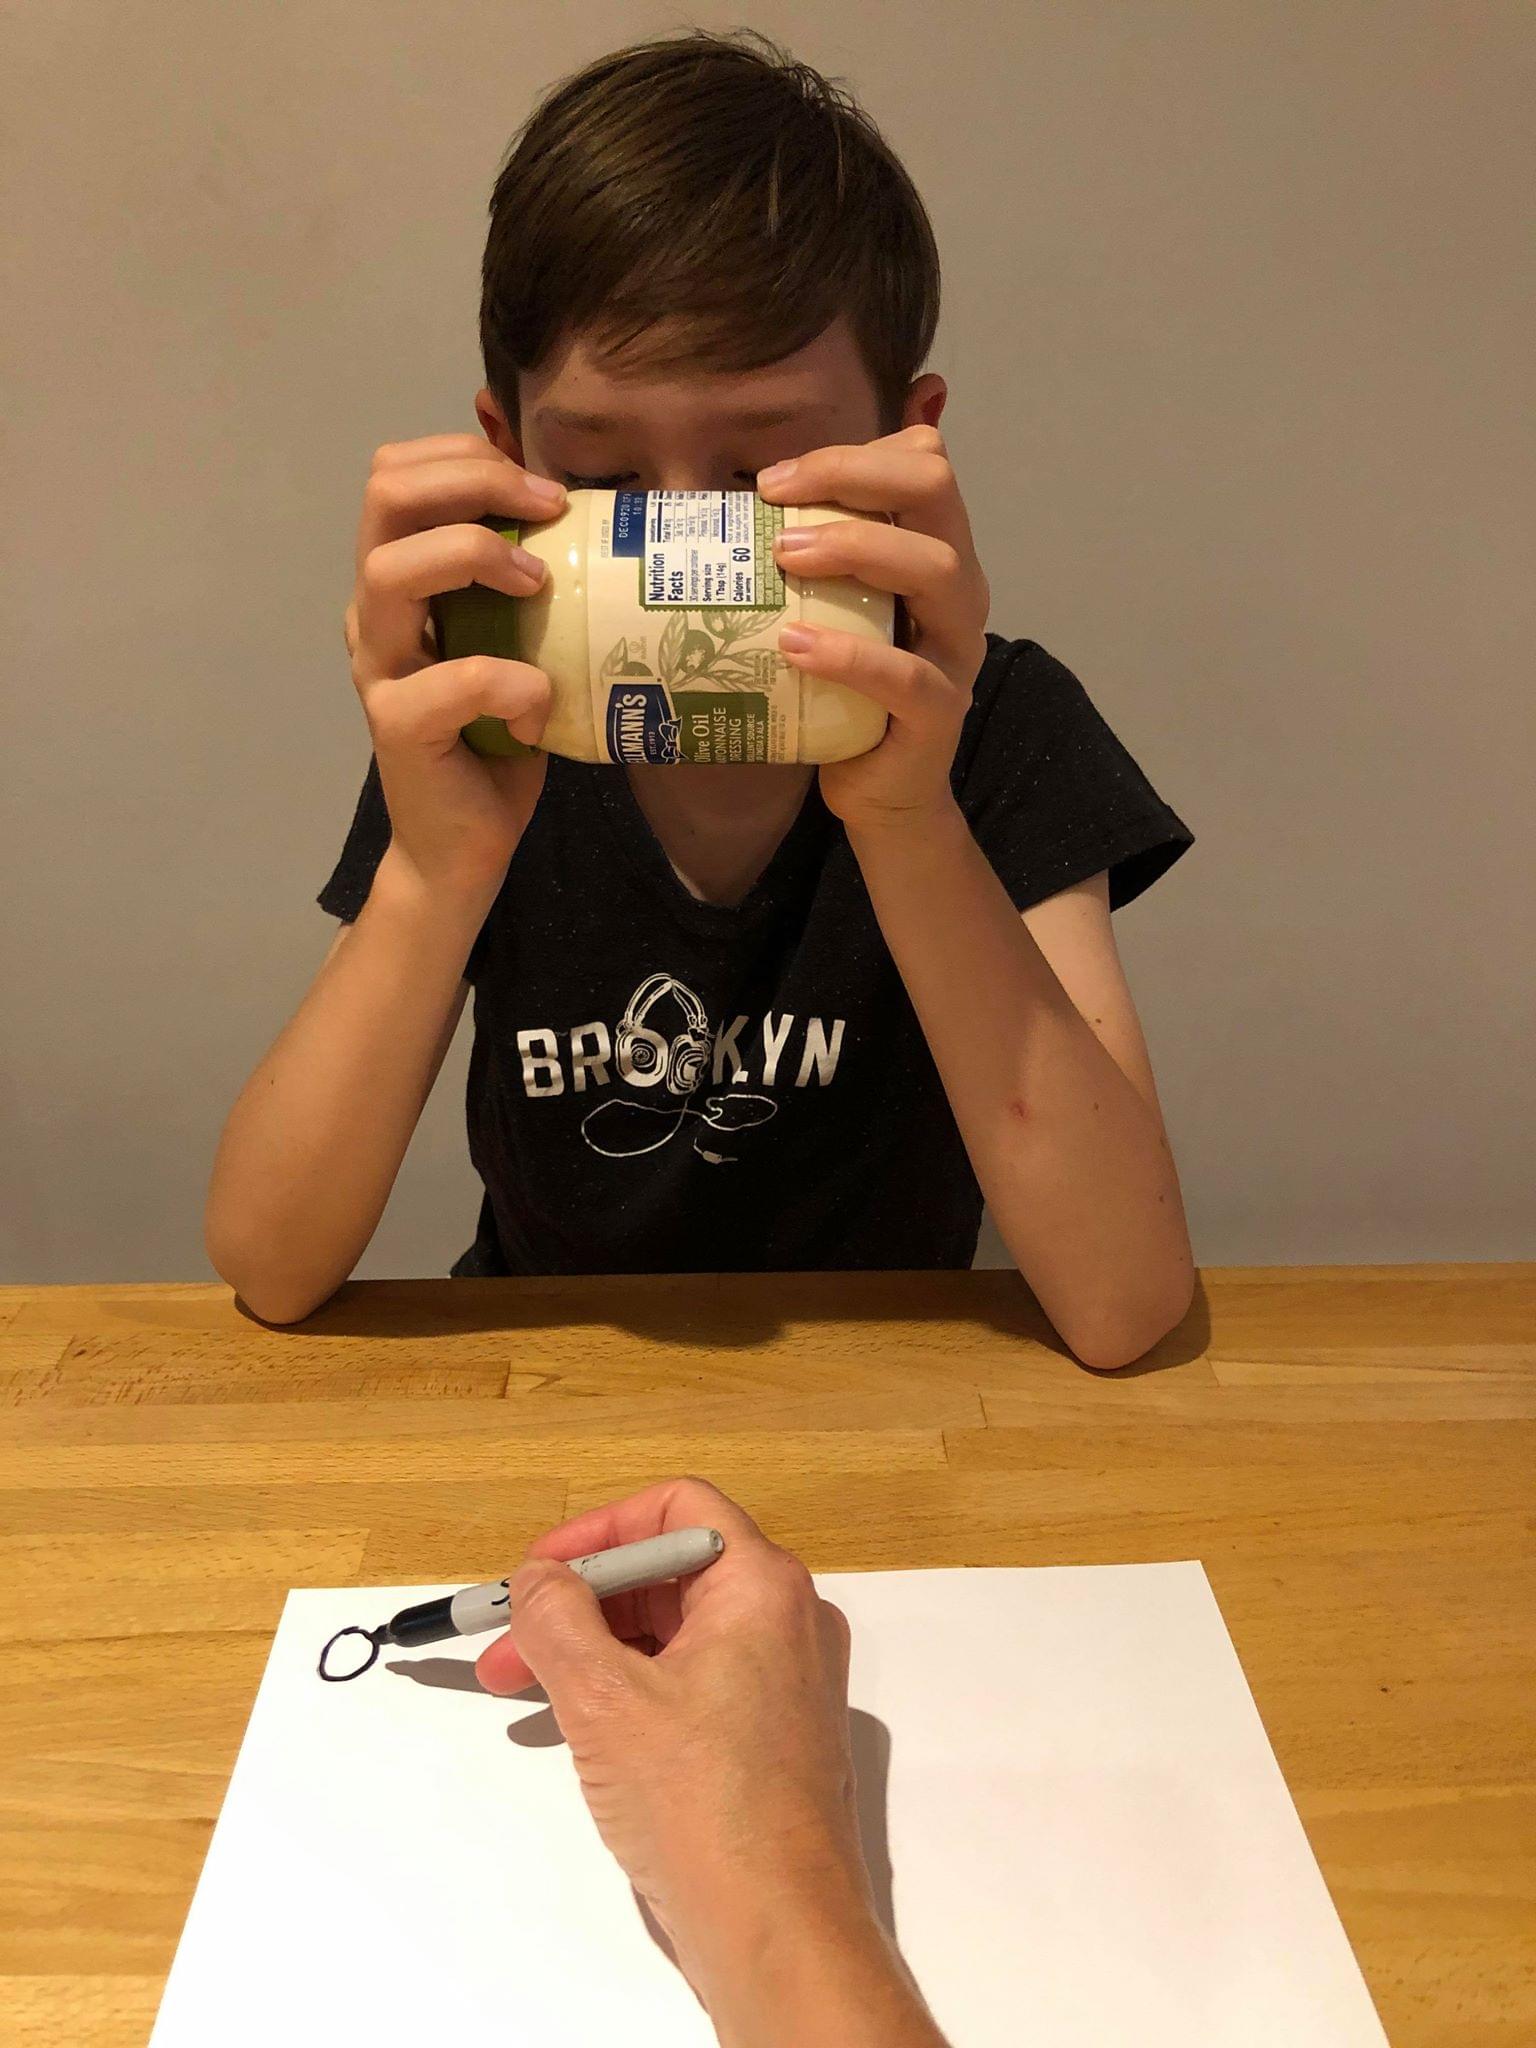 Child reading out each digit of the product code except the last digit.